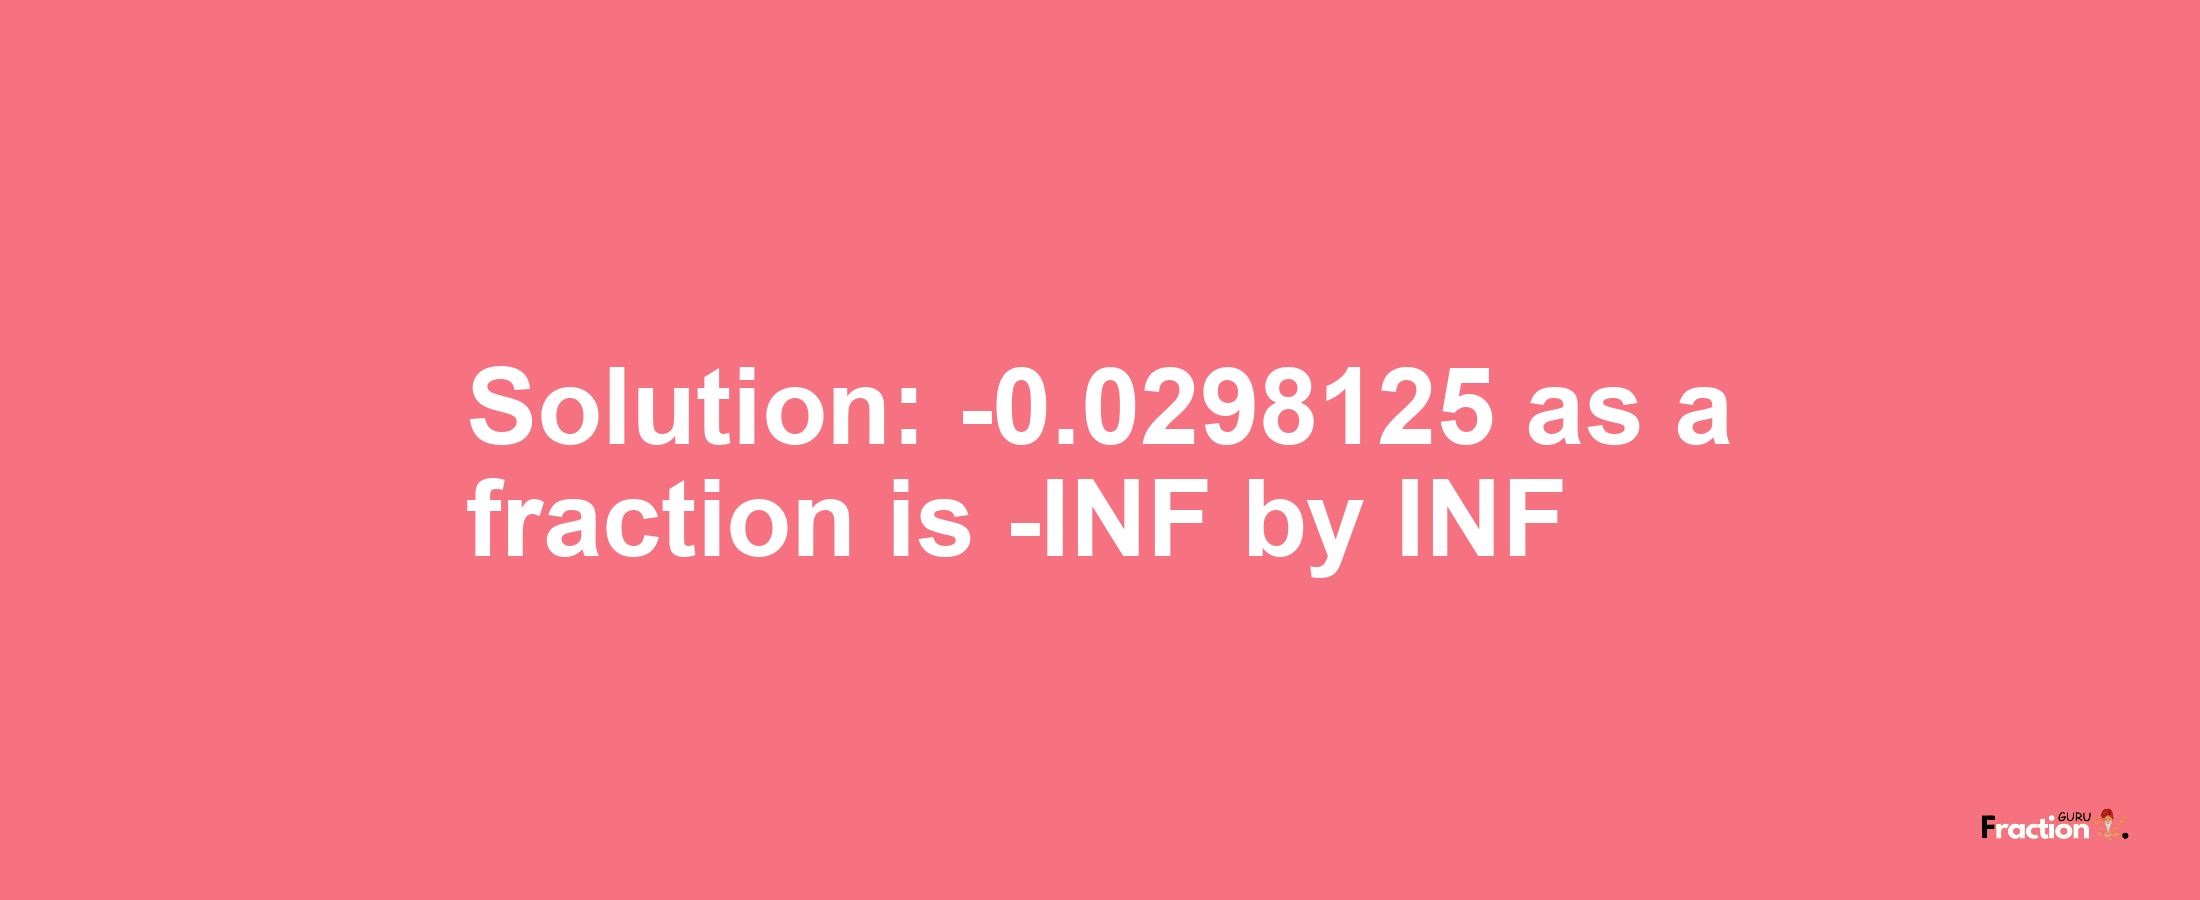 Solution:-0.0298125 as a fraction is -INF/INF